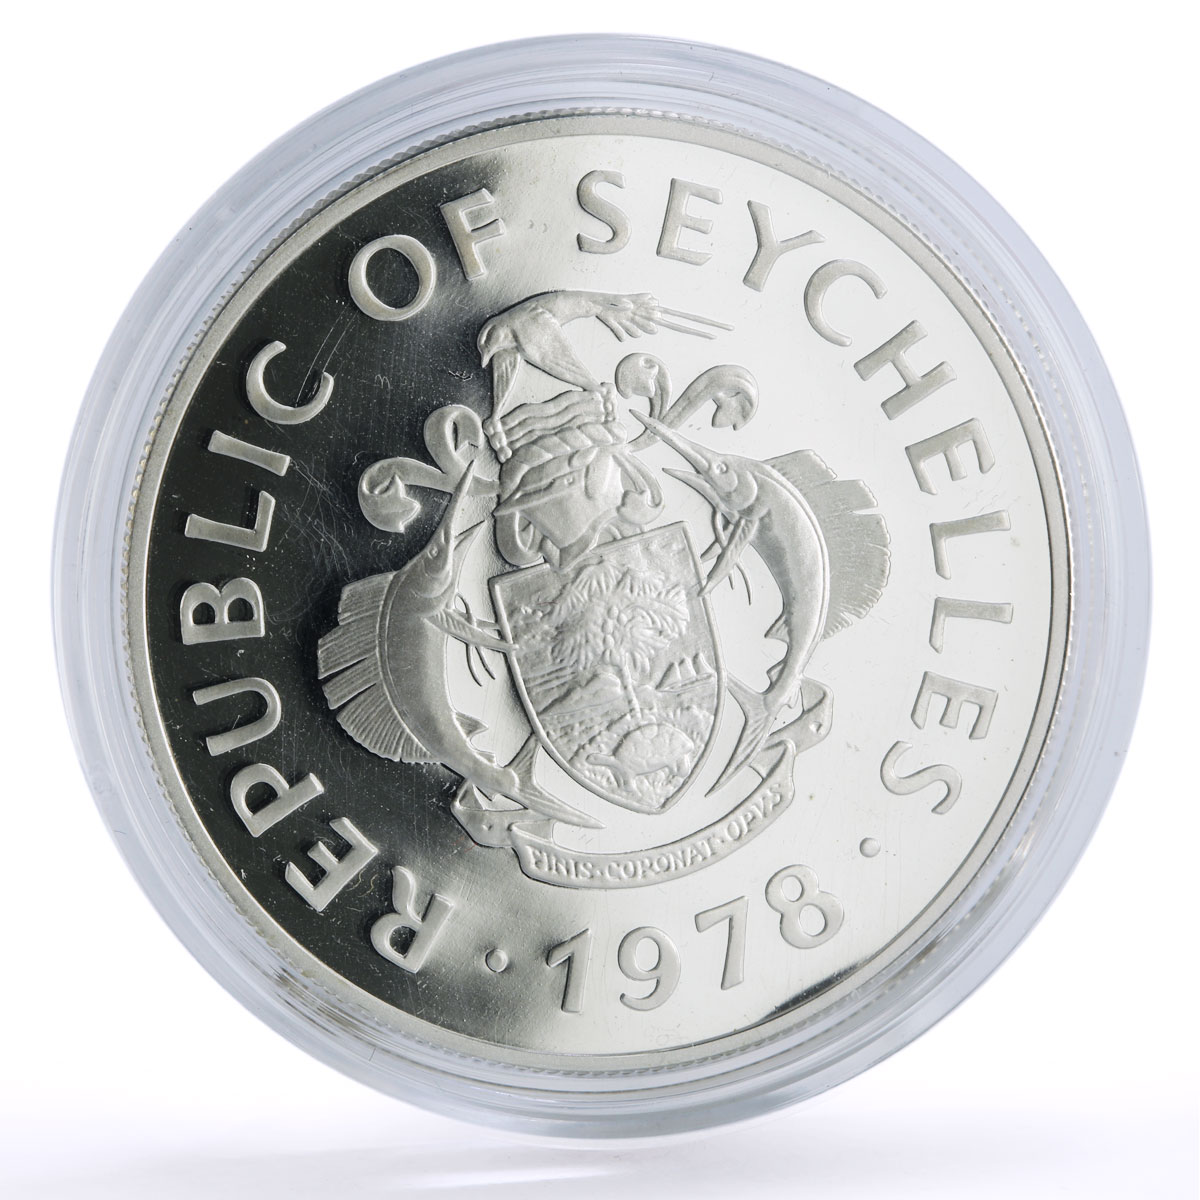 Seychelles 100 rupees Conservation Wildlife Tropic Birds Fauna silver coin 1978